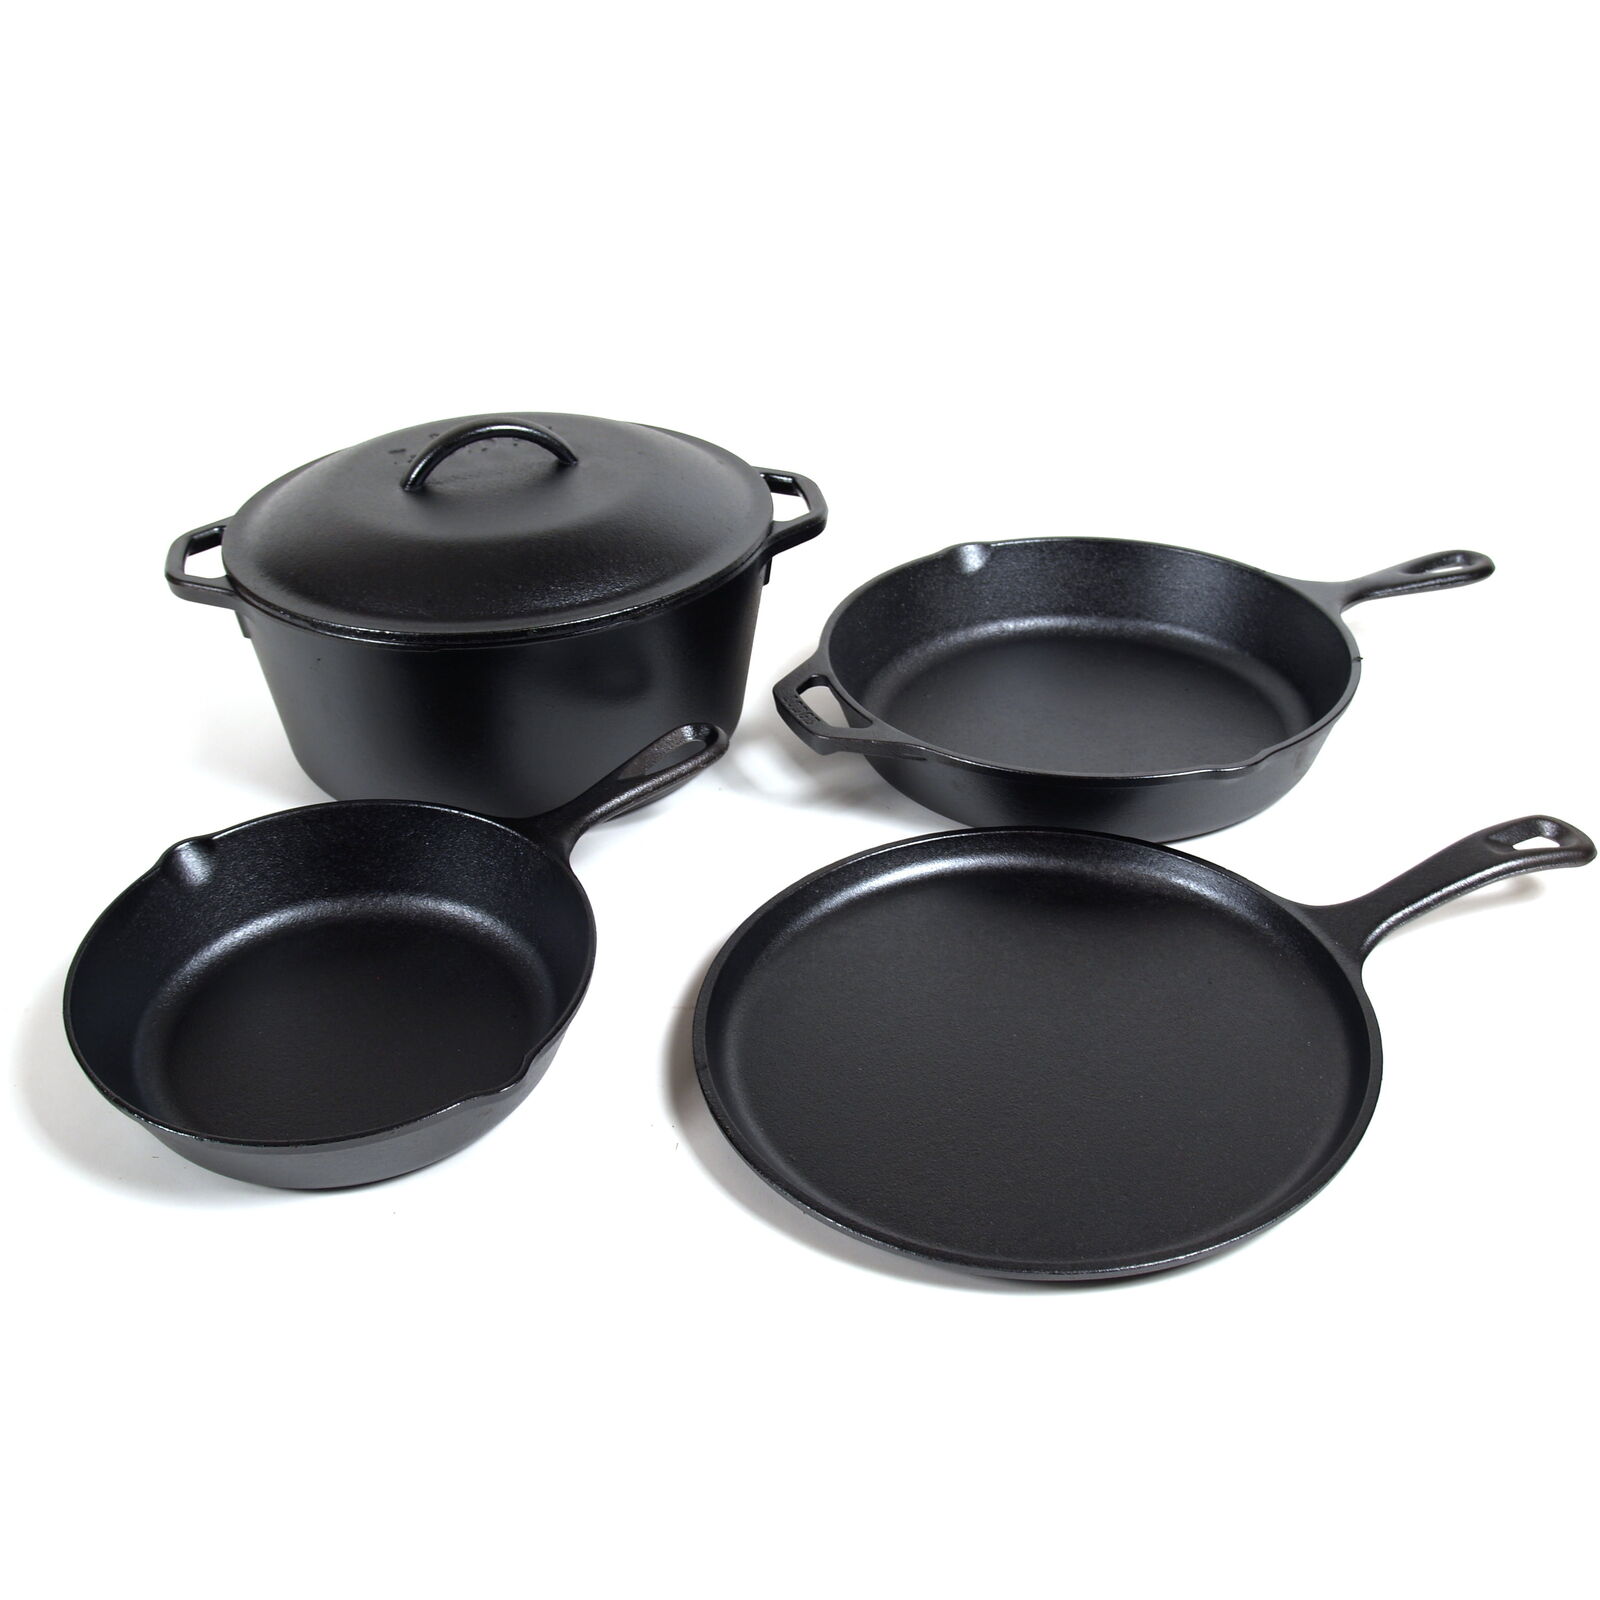 Cast Iron Seasoning 5-Piece Set with Skillet, Baking Pan and Dutch Oven